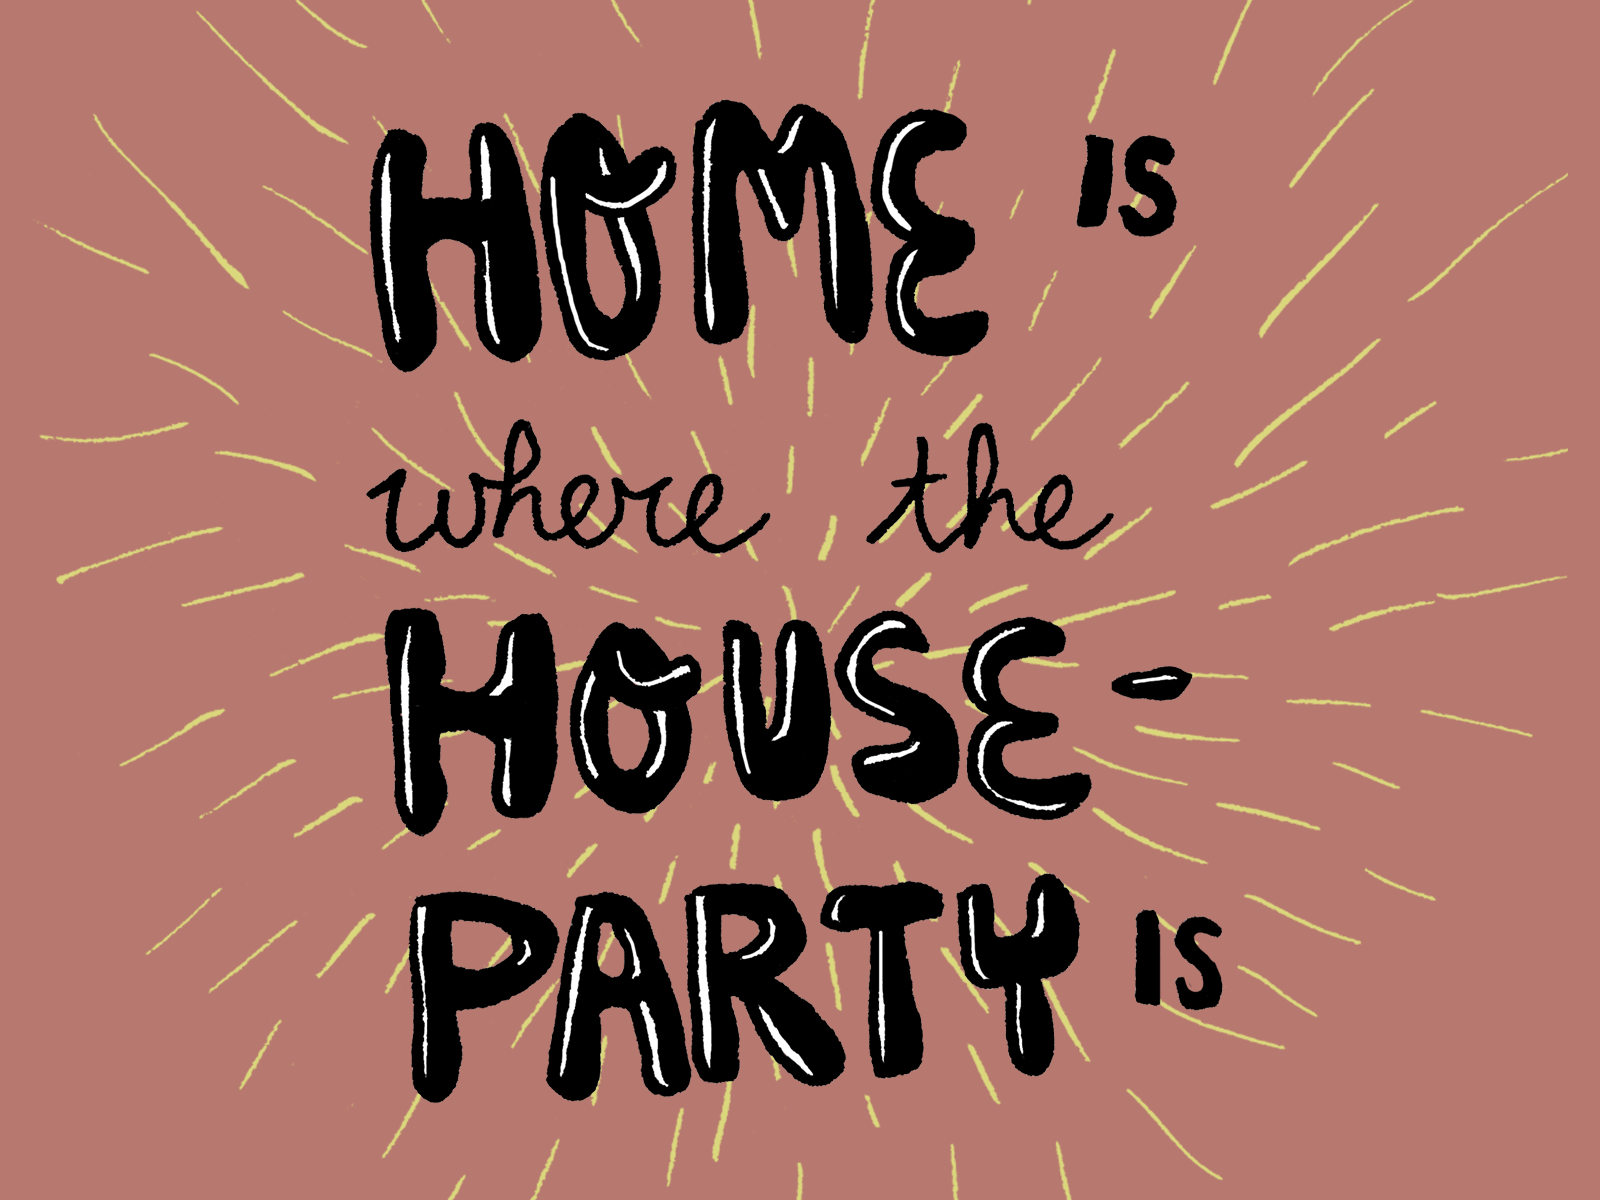 Home is where... - Covid-19 gif series animation drawings gif animation handlettering handwriting illustration illustration art loop animation